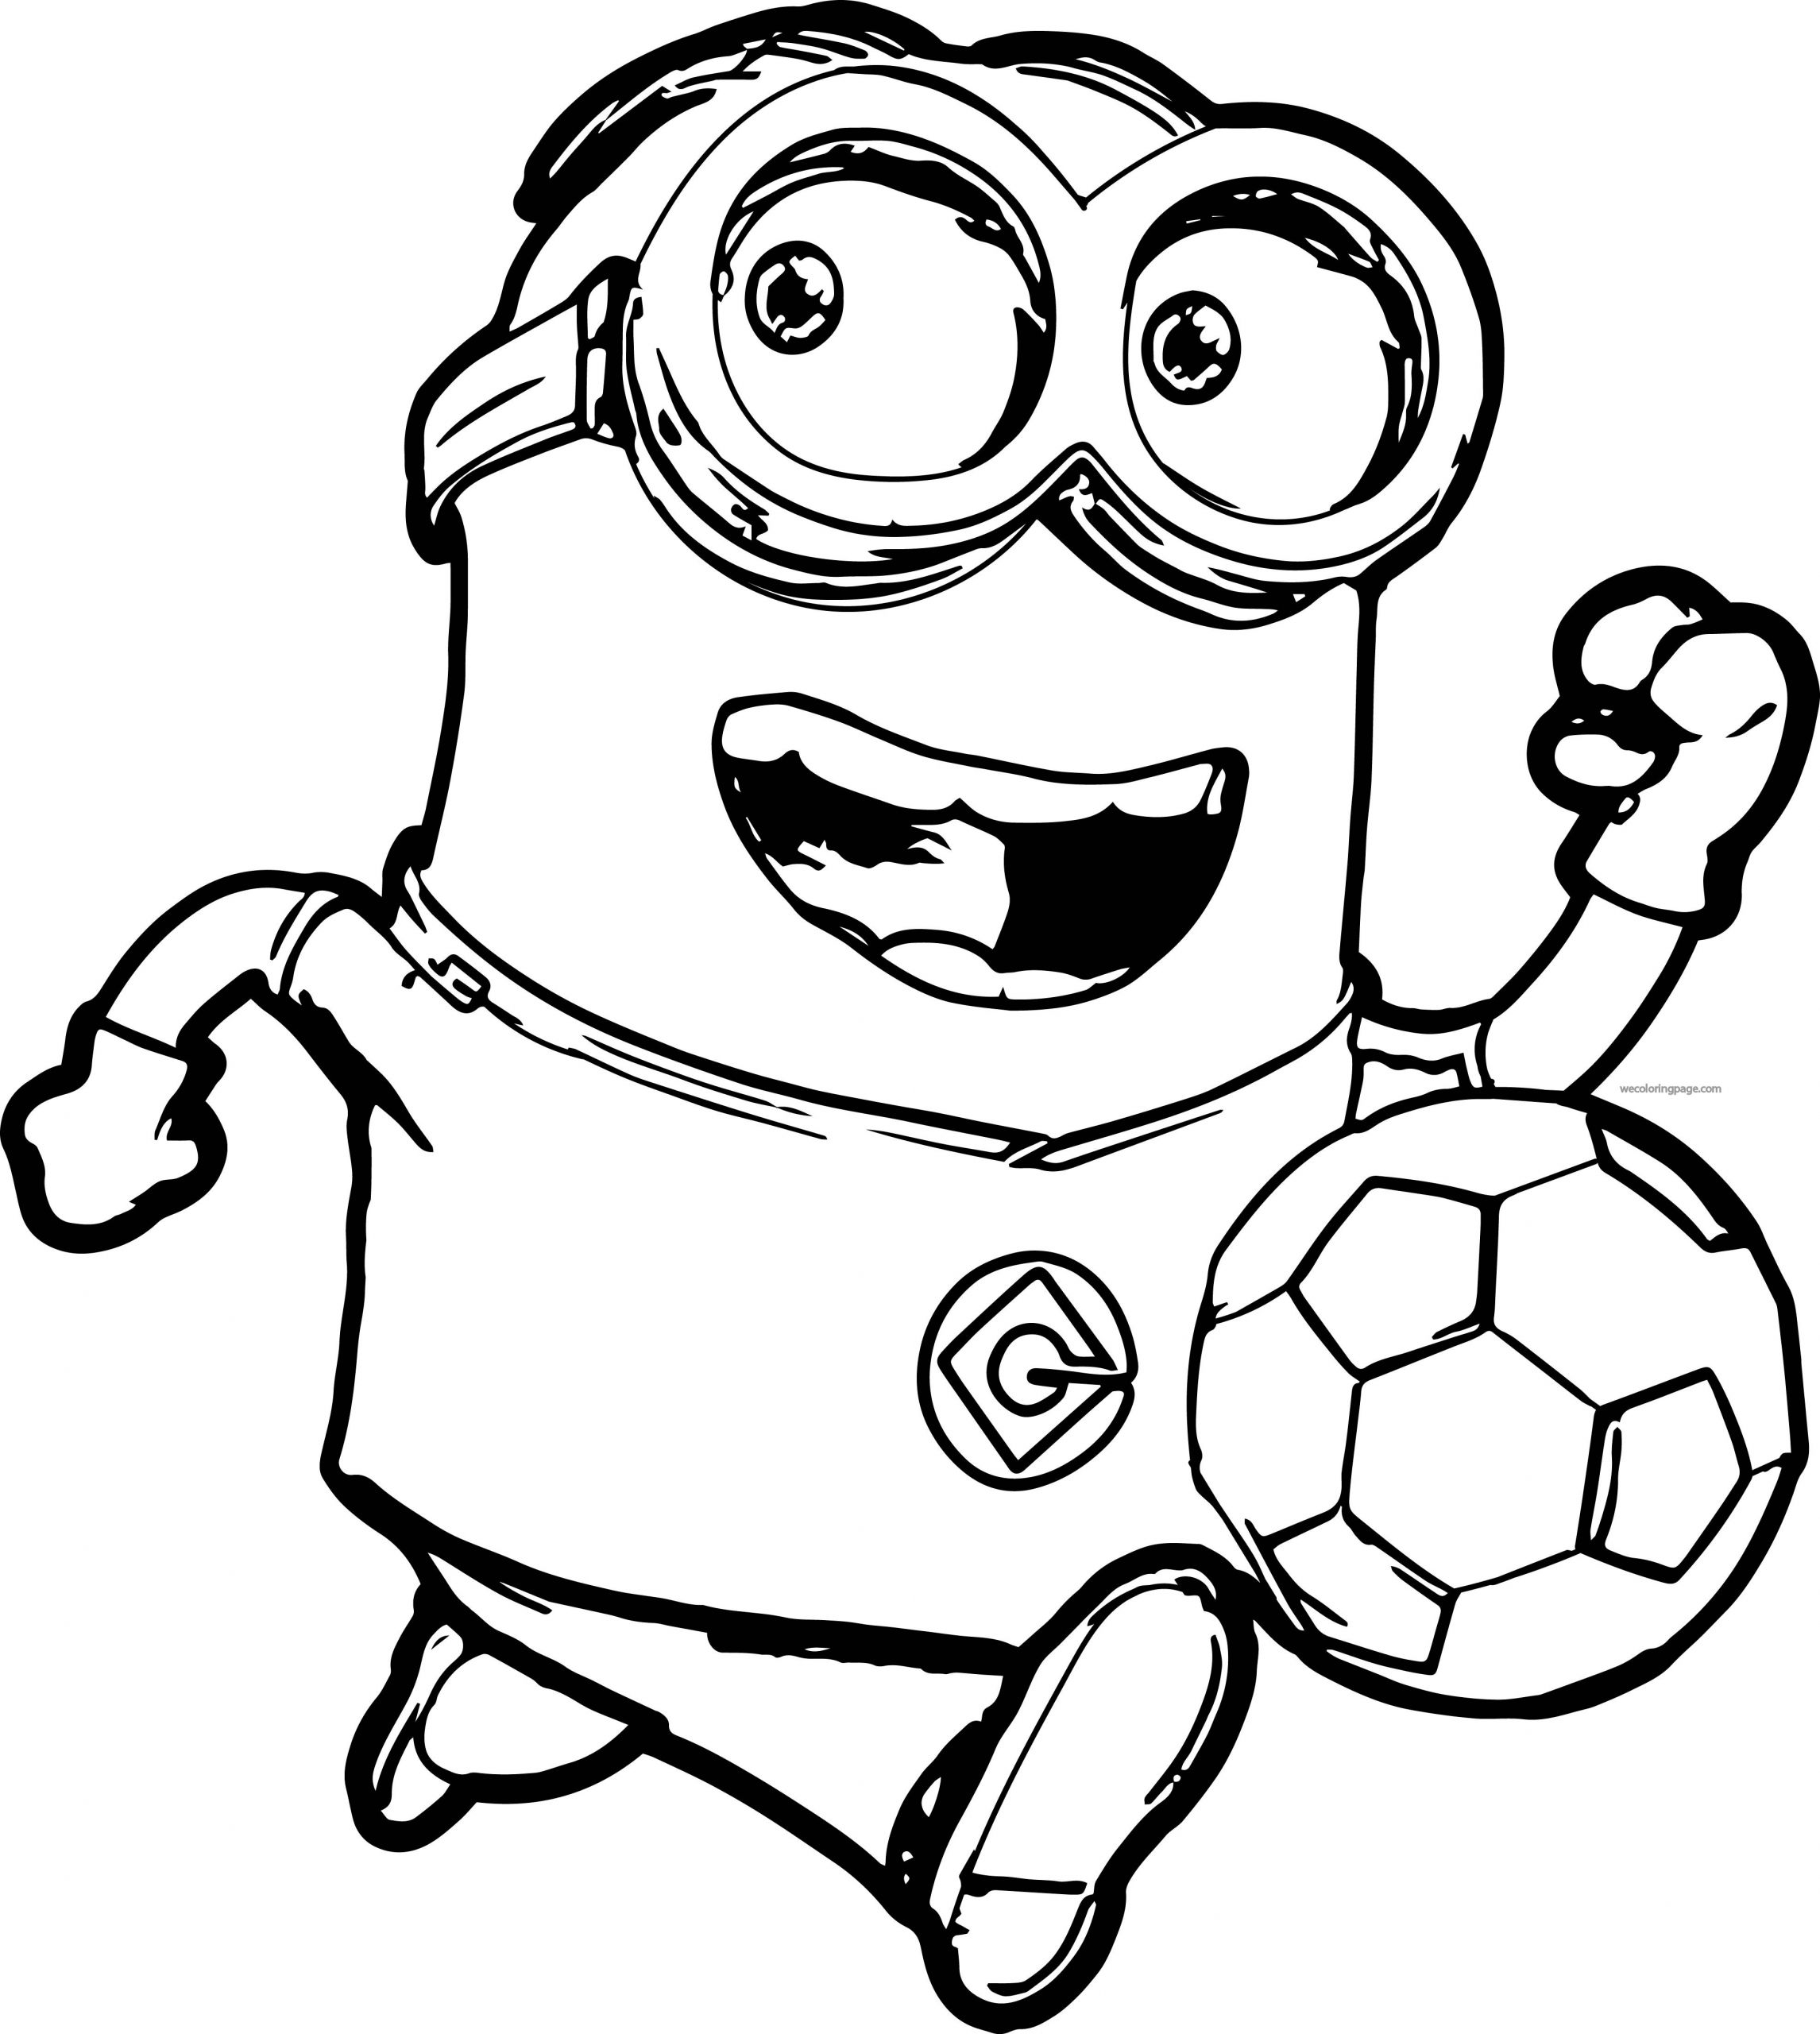 Kids Coloring Page
 Minion Coloring Pages Best Coloring Pages For Kids